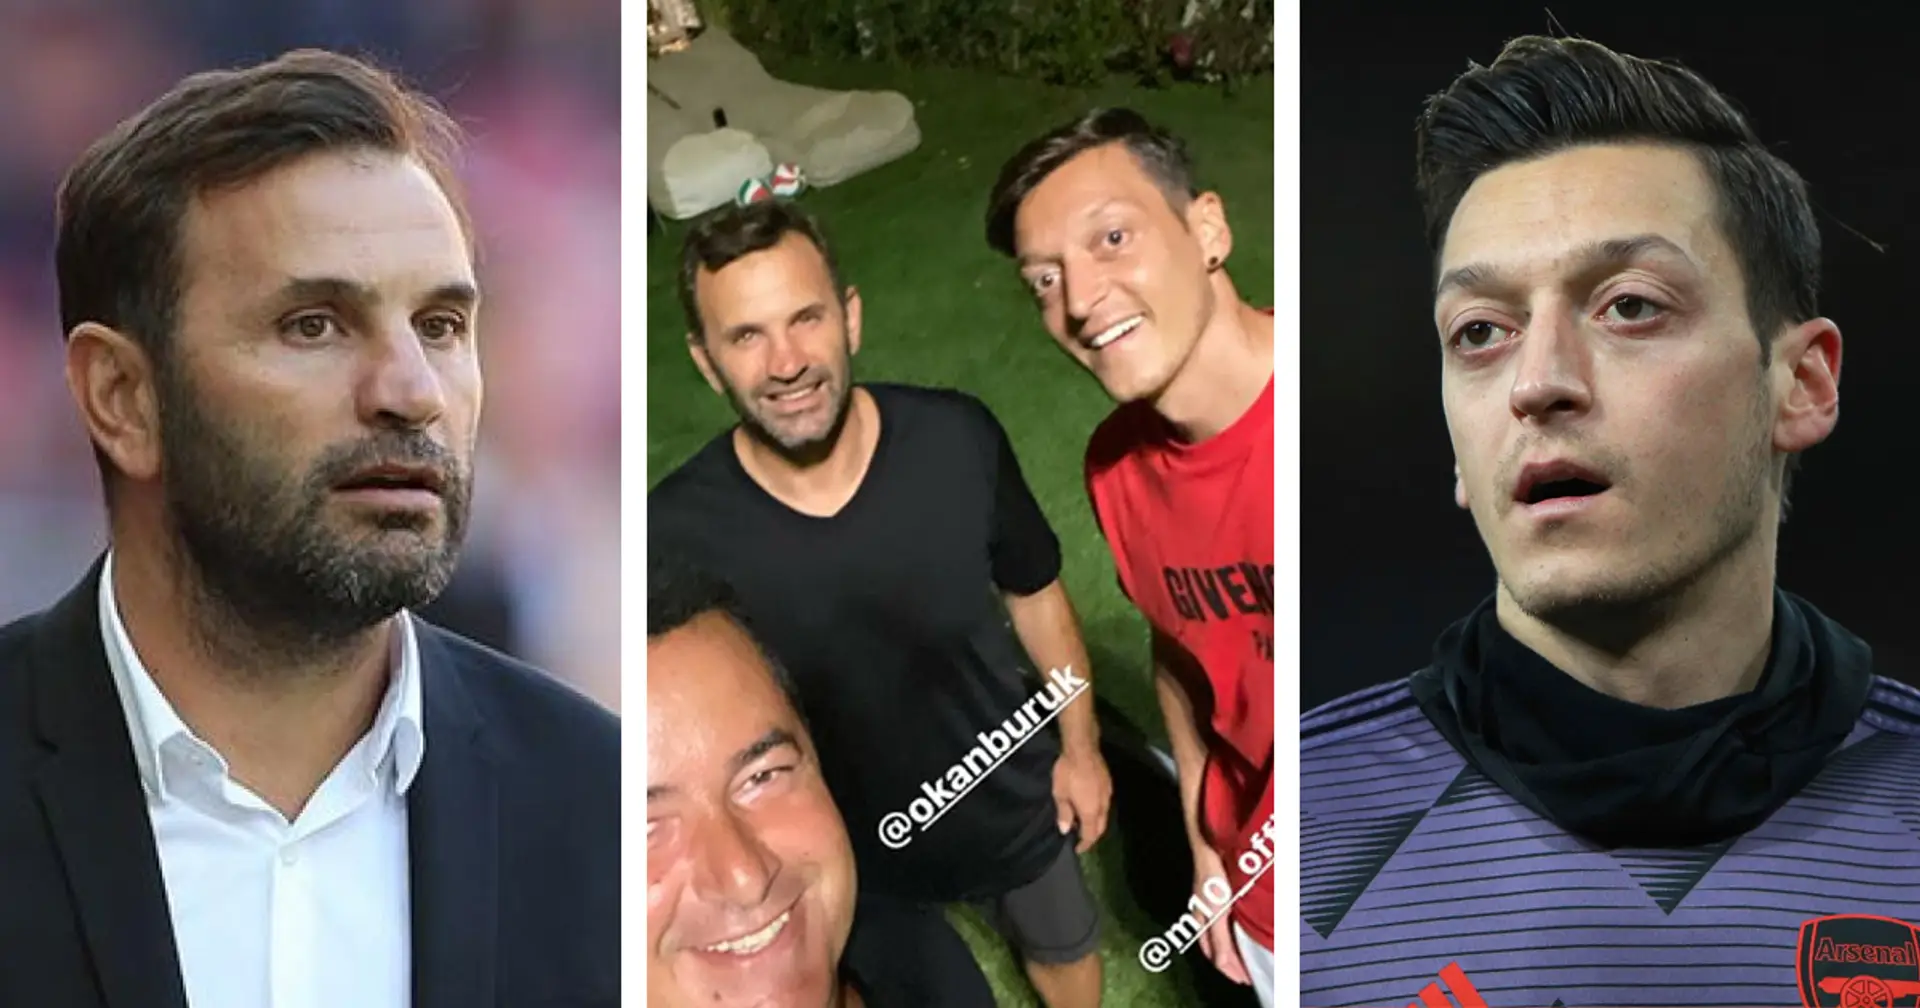 Arsenal exit on cards? Ozil spotted hanging out with Istanbul Basaksehir manager in Turkey